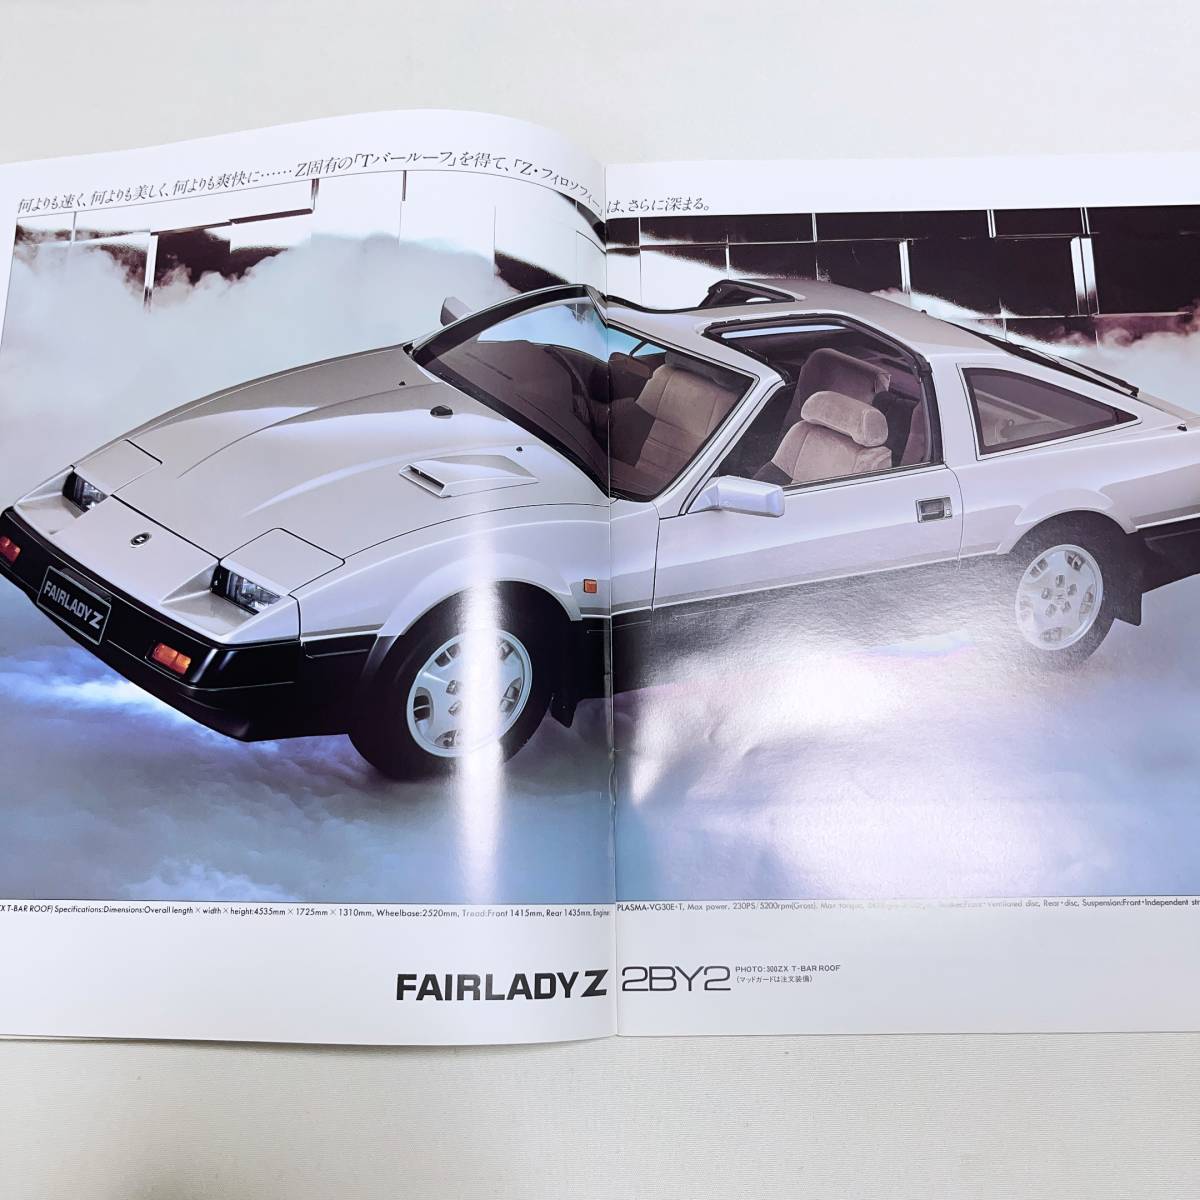  Fairlady Z 31 type catalog 36 page 60 year 10 month with price list . Fairlady Z 31